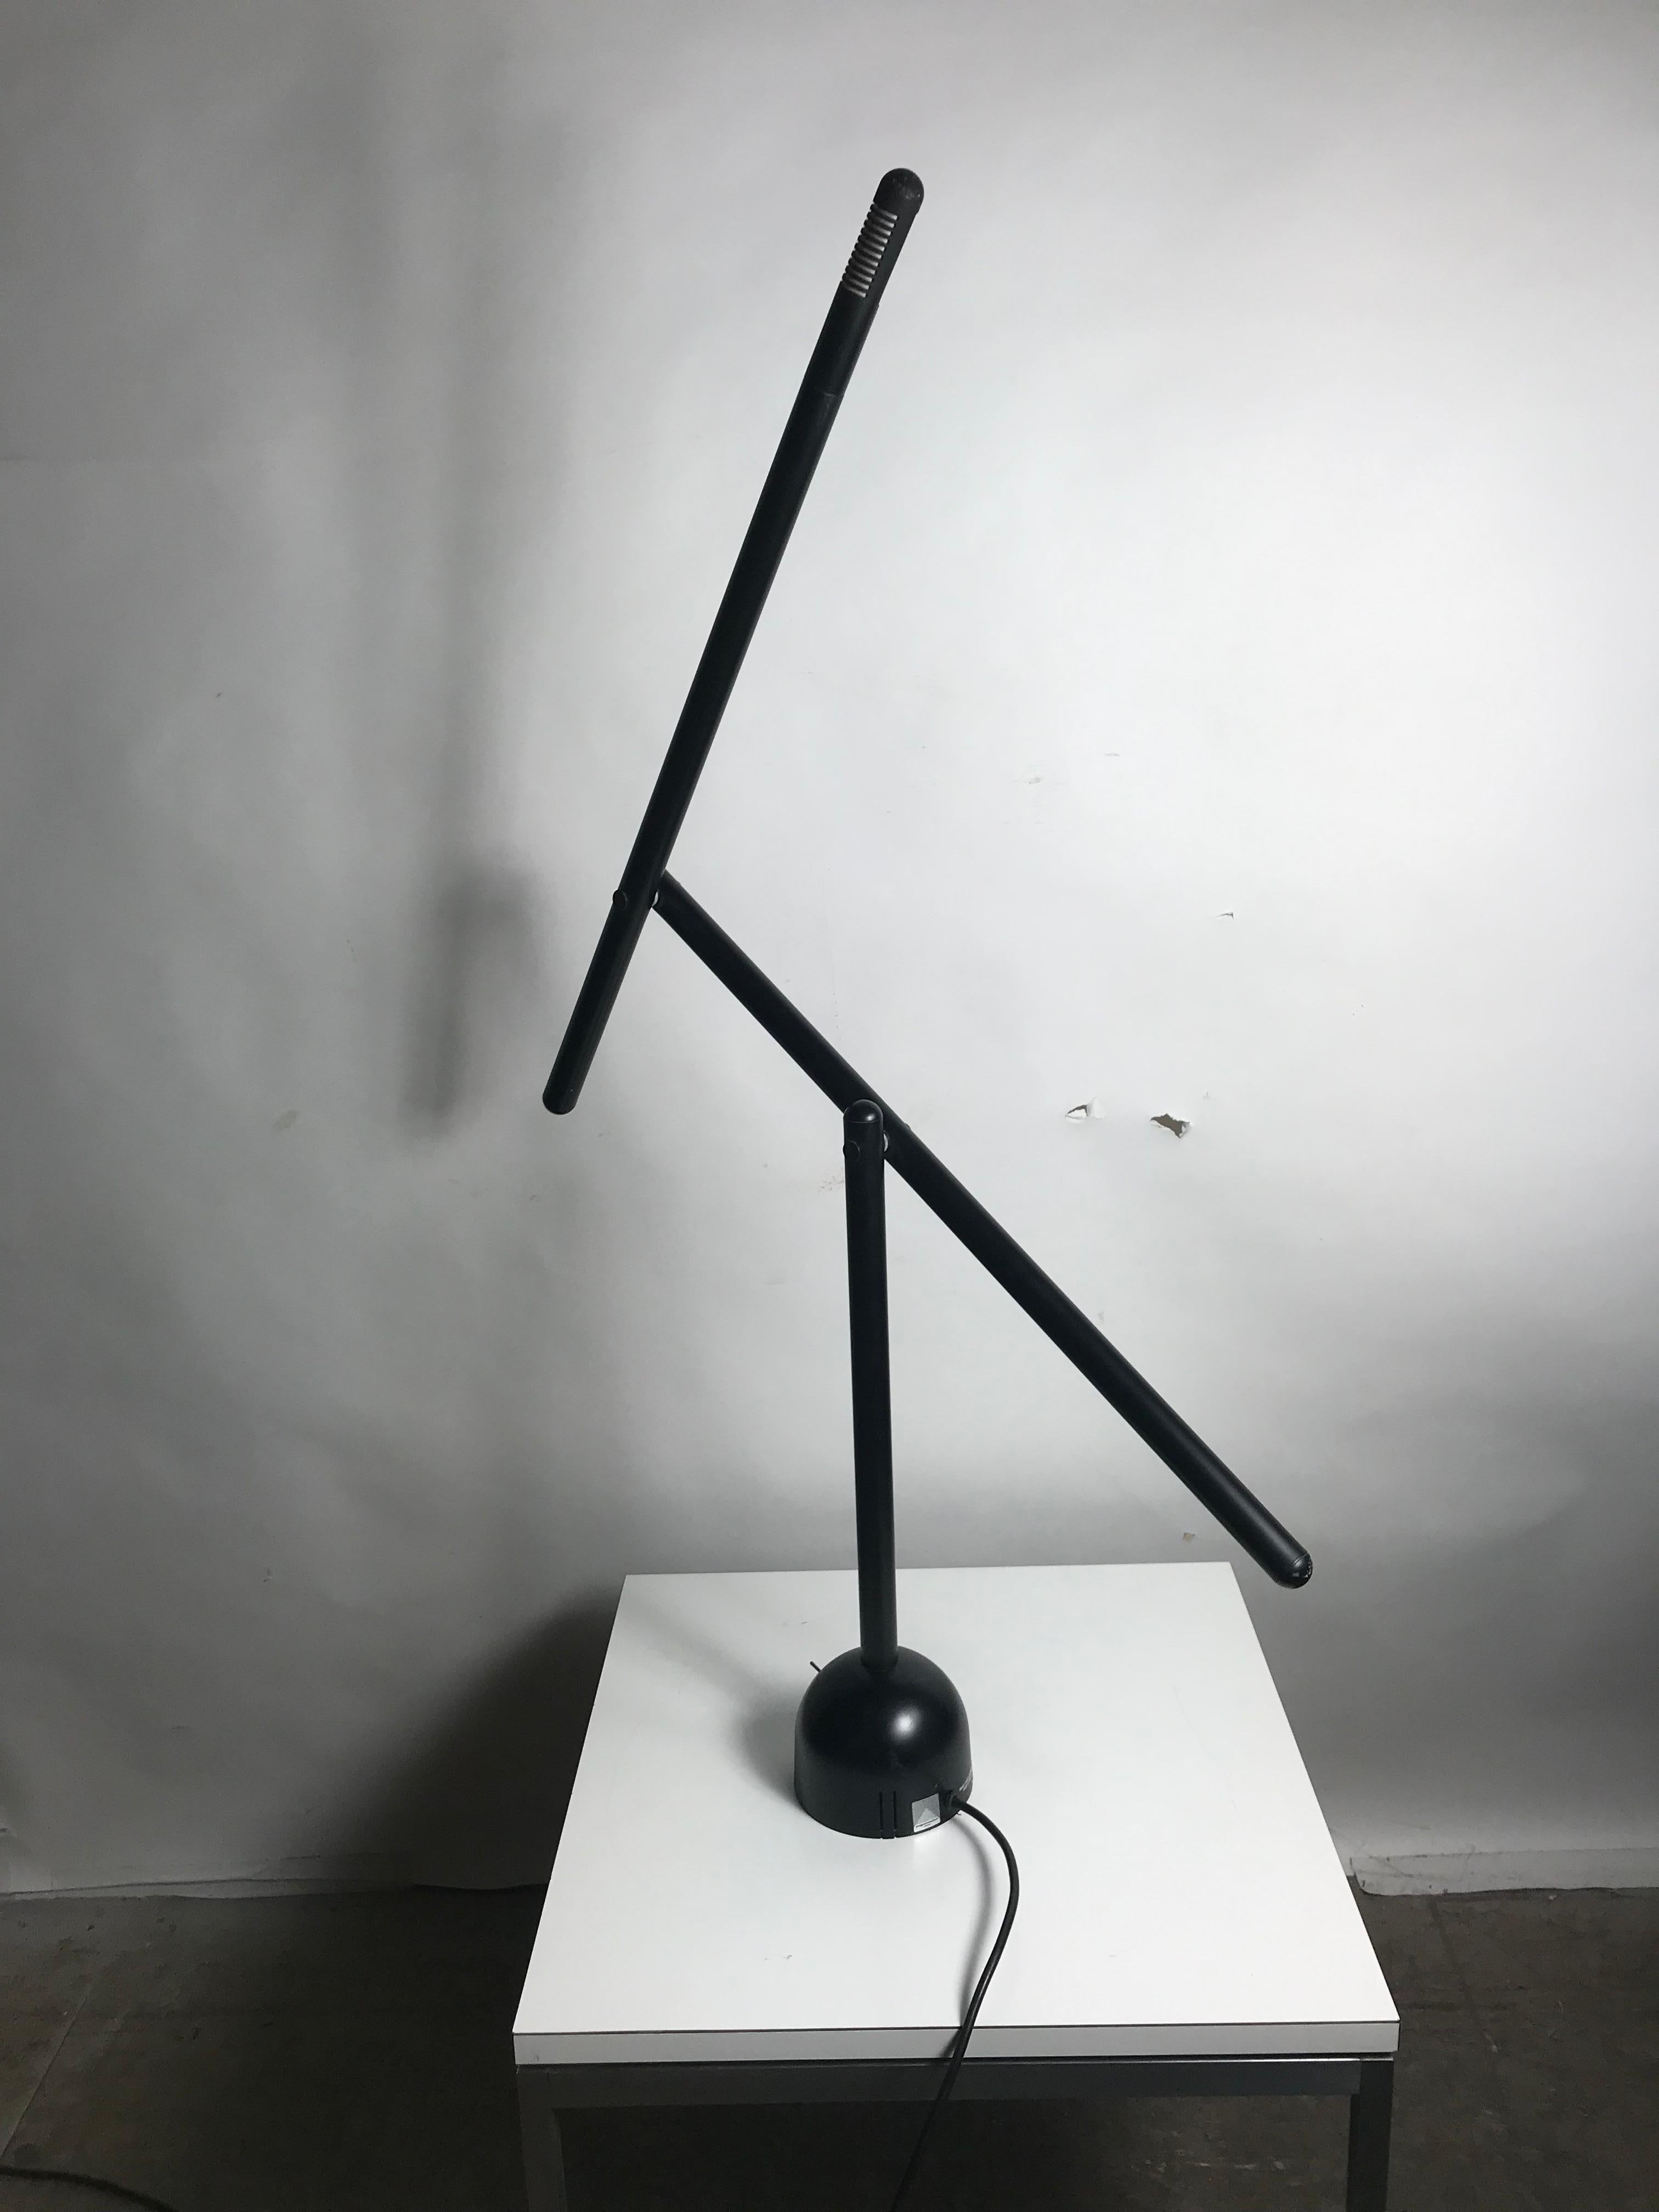 Articulated Mira table lamp by Mario Arnaboldi designed in Italy, limited production, produced for only one year, 1970 Enameled metal and aluminum construction with pivoting head. Original cord. Takes one G9 halogen bulb. Original black finish.